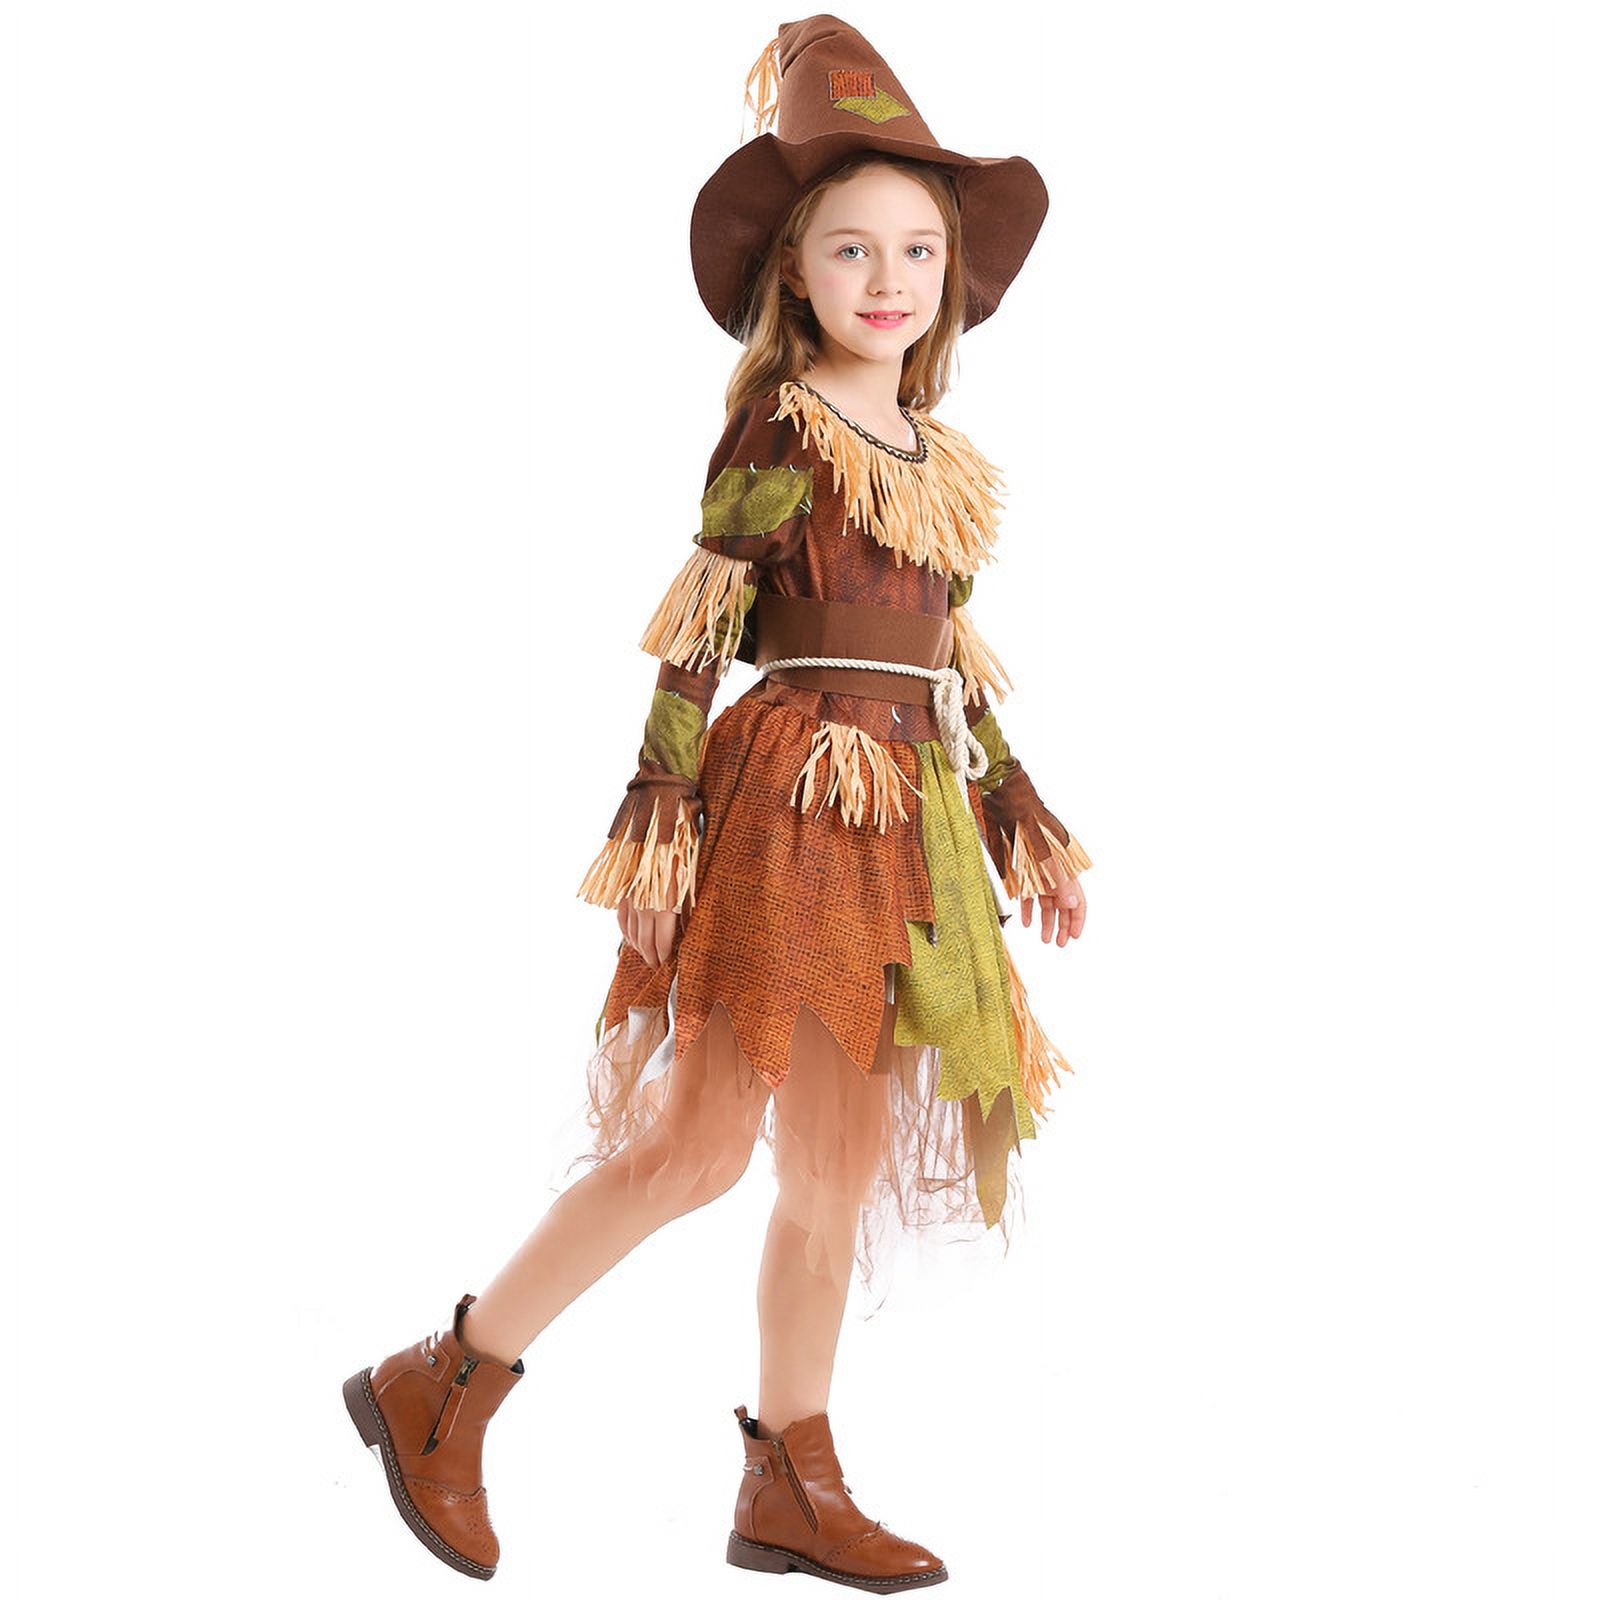 Children Girls Scary Farm Scarecrow Costume Party Dress up, 4-10Y - image 3 of 6